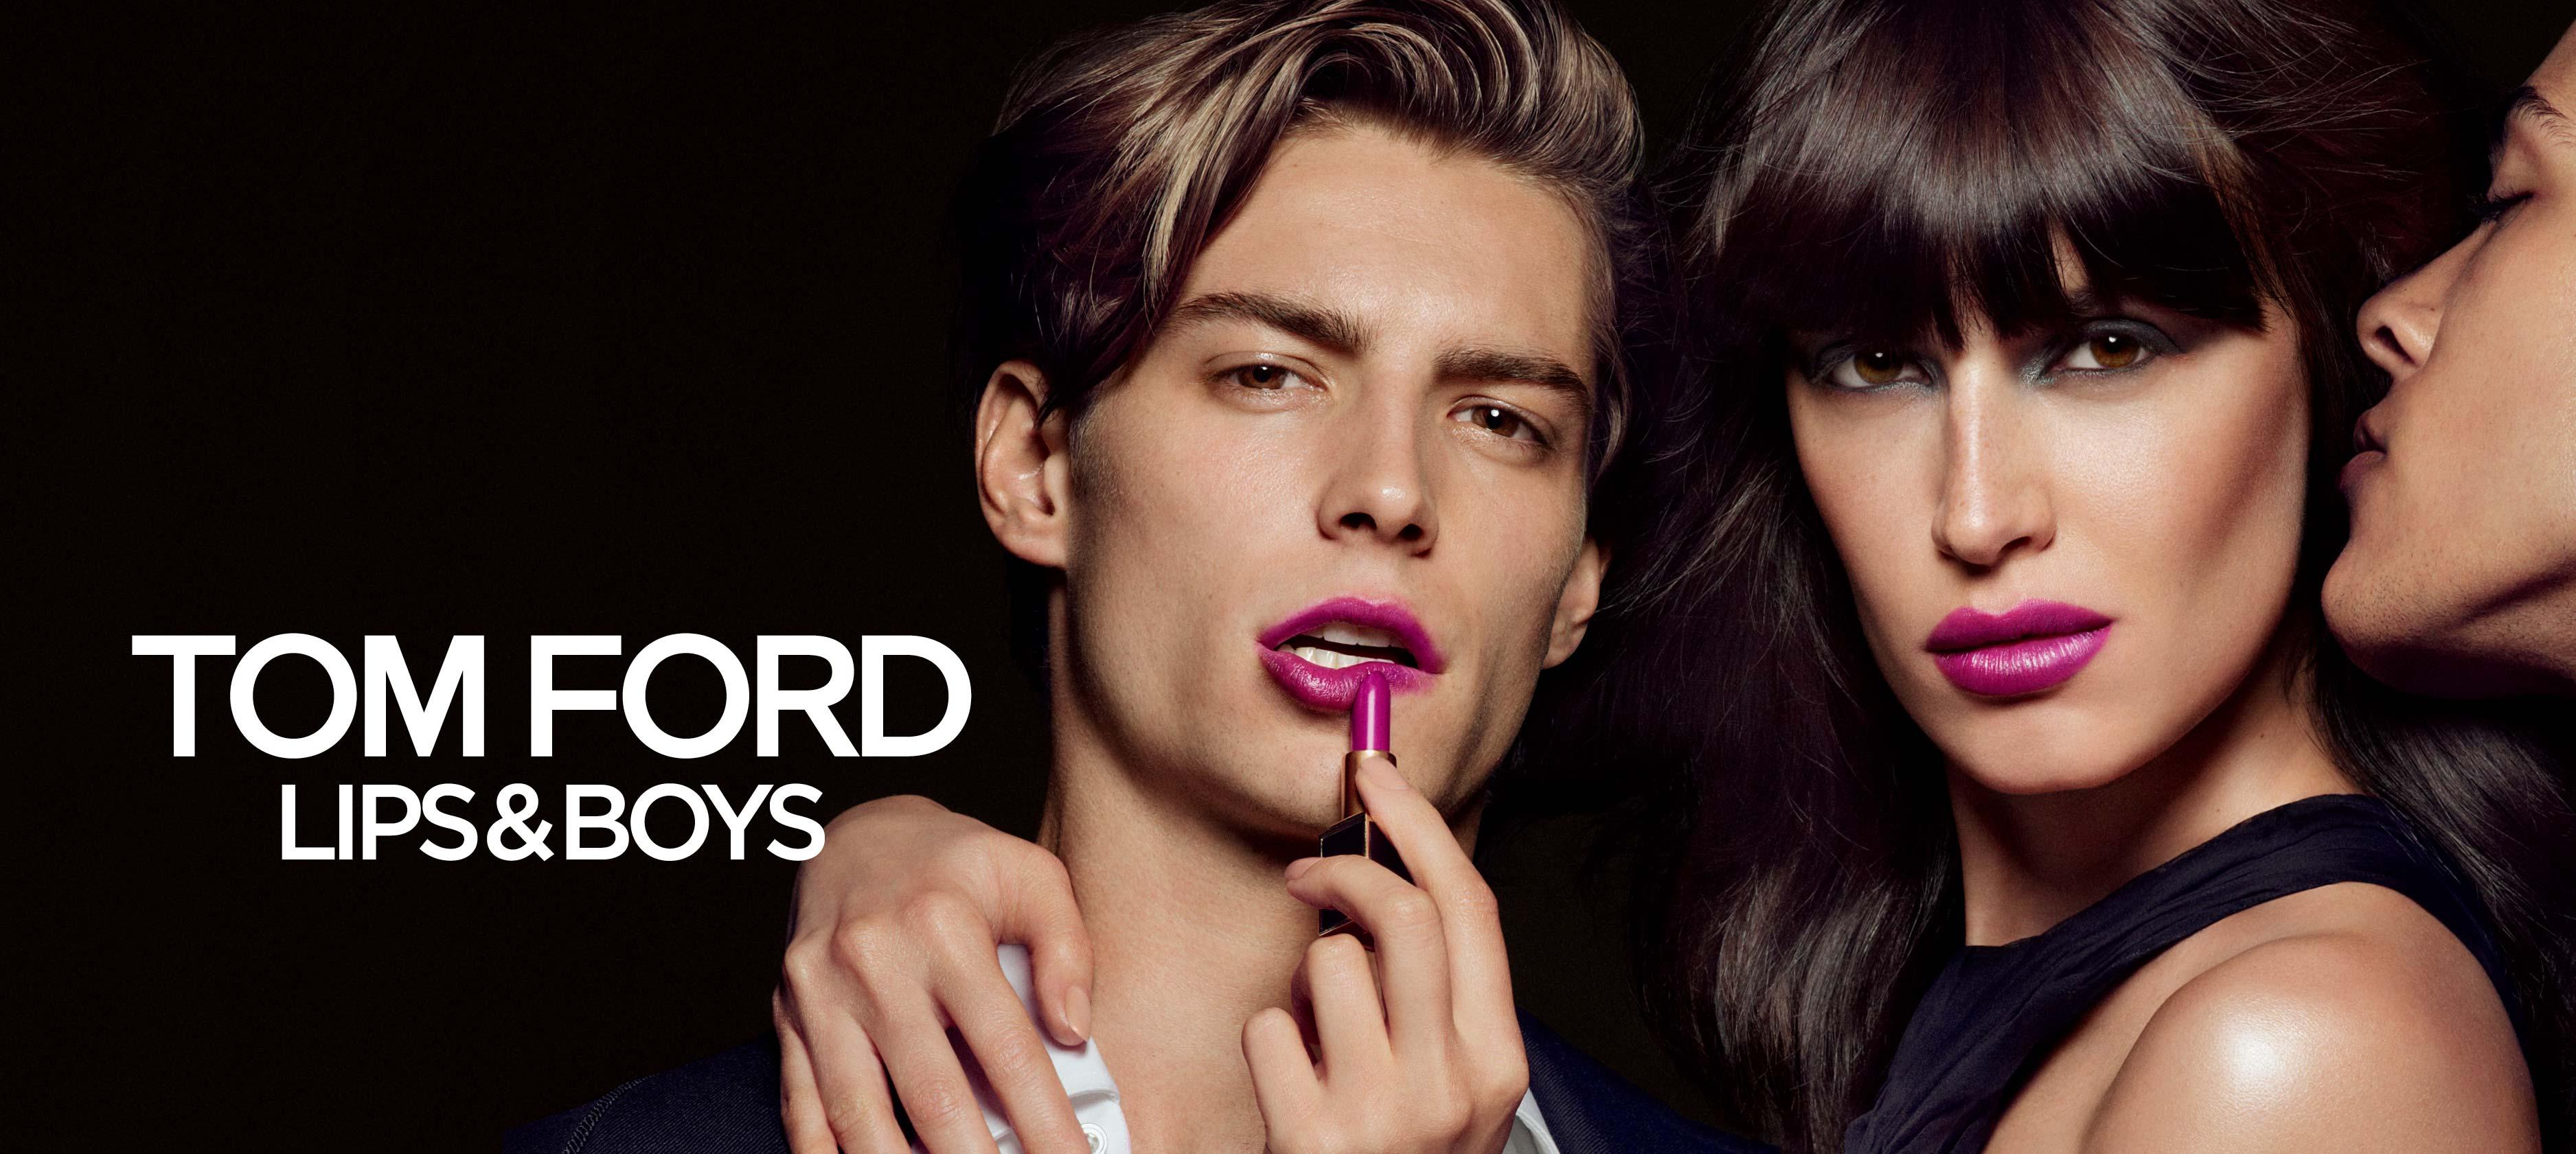 tom ford lips and boys copert kate on beauty